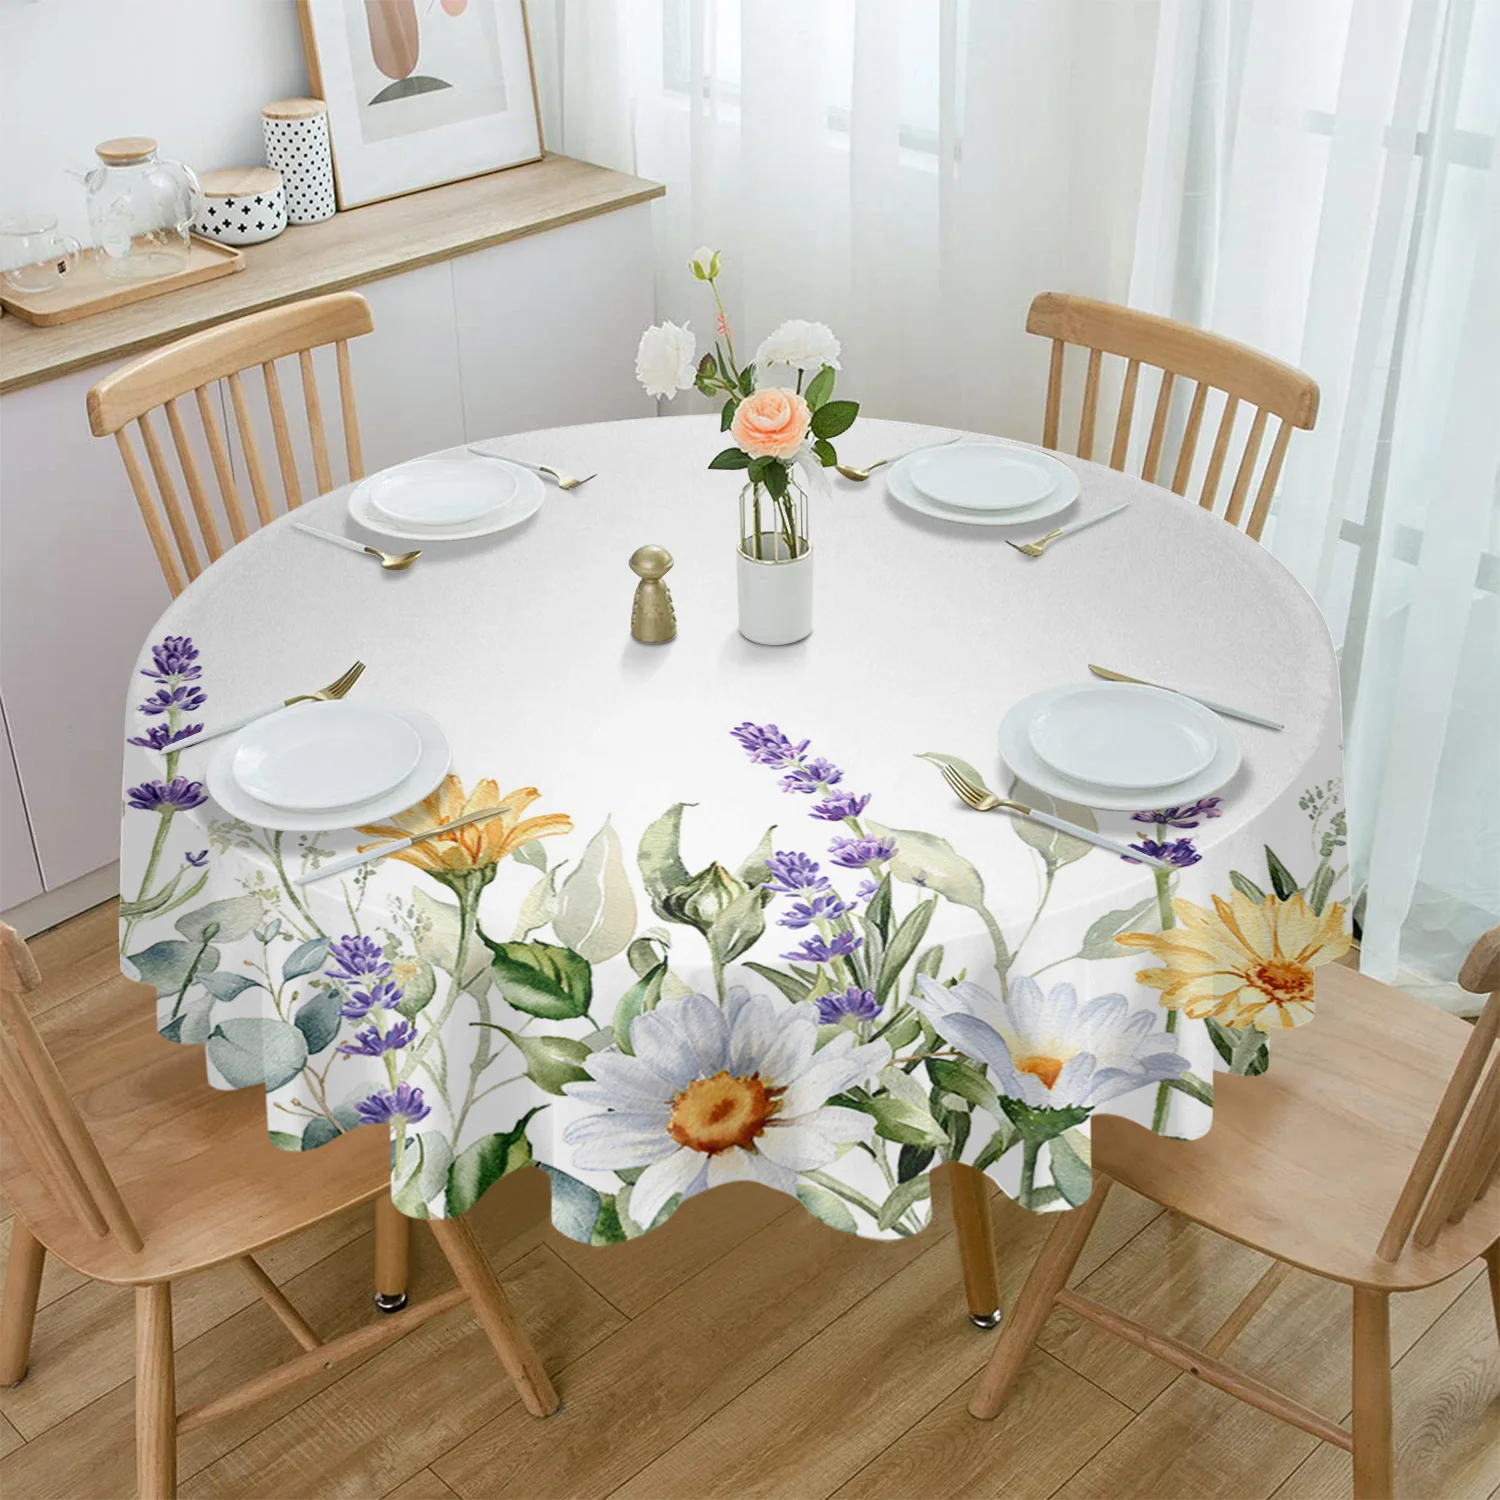 

Spring Daisy Lavender Eucalyptus Round Table Cloth Festival Dining Waterproof Tablecloth Table Cover for Wedding Party Decor